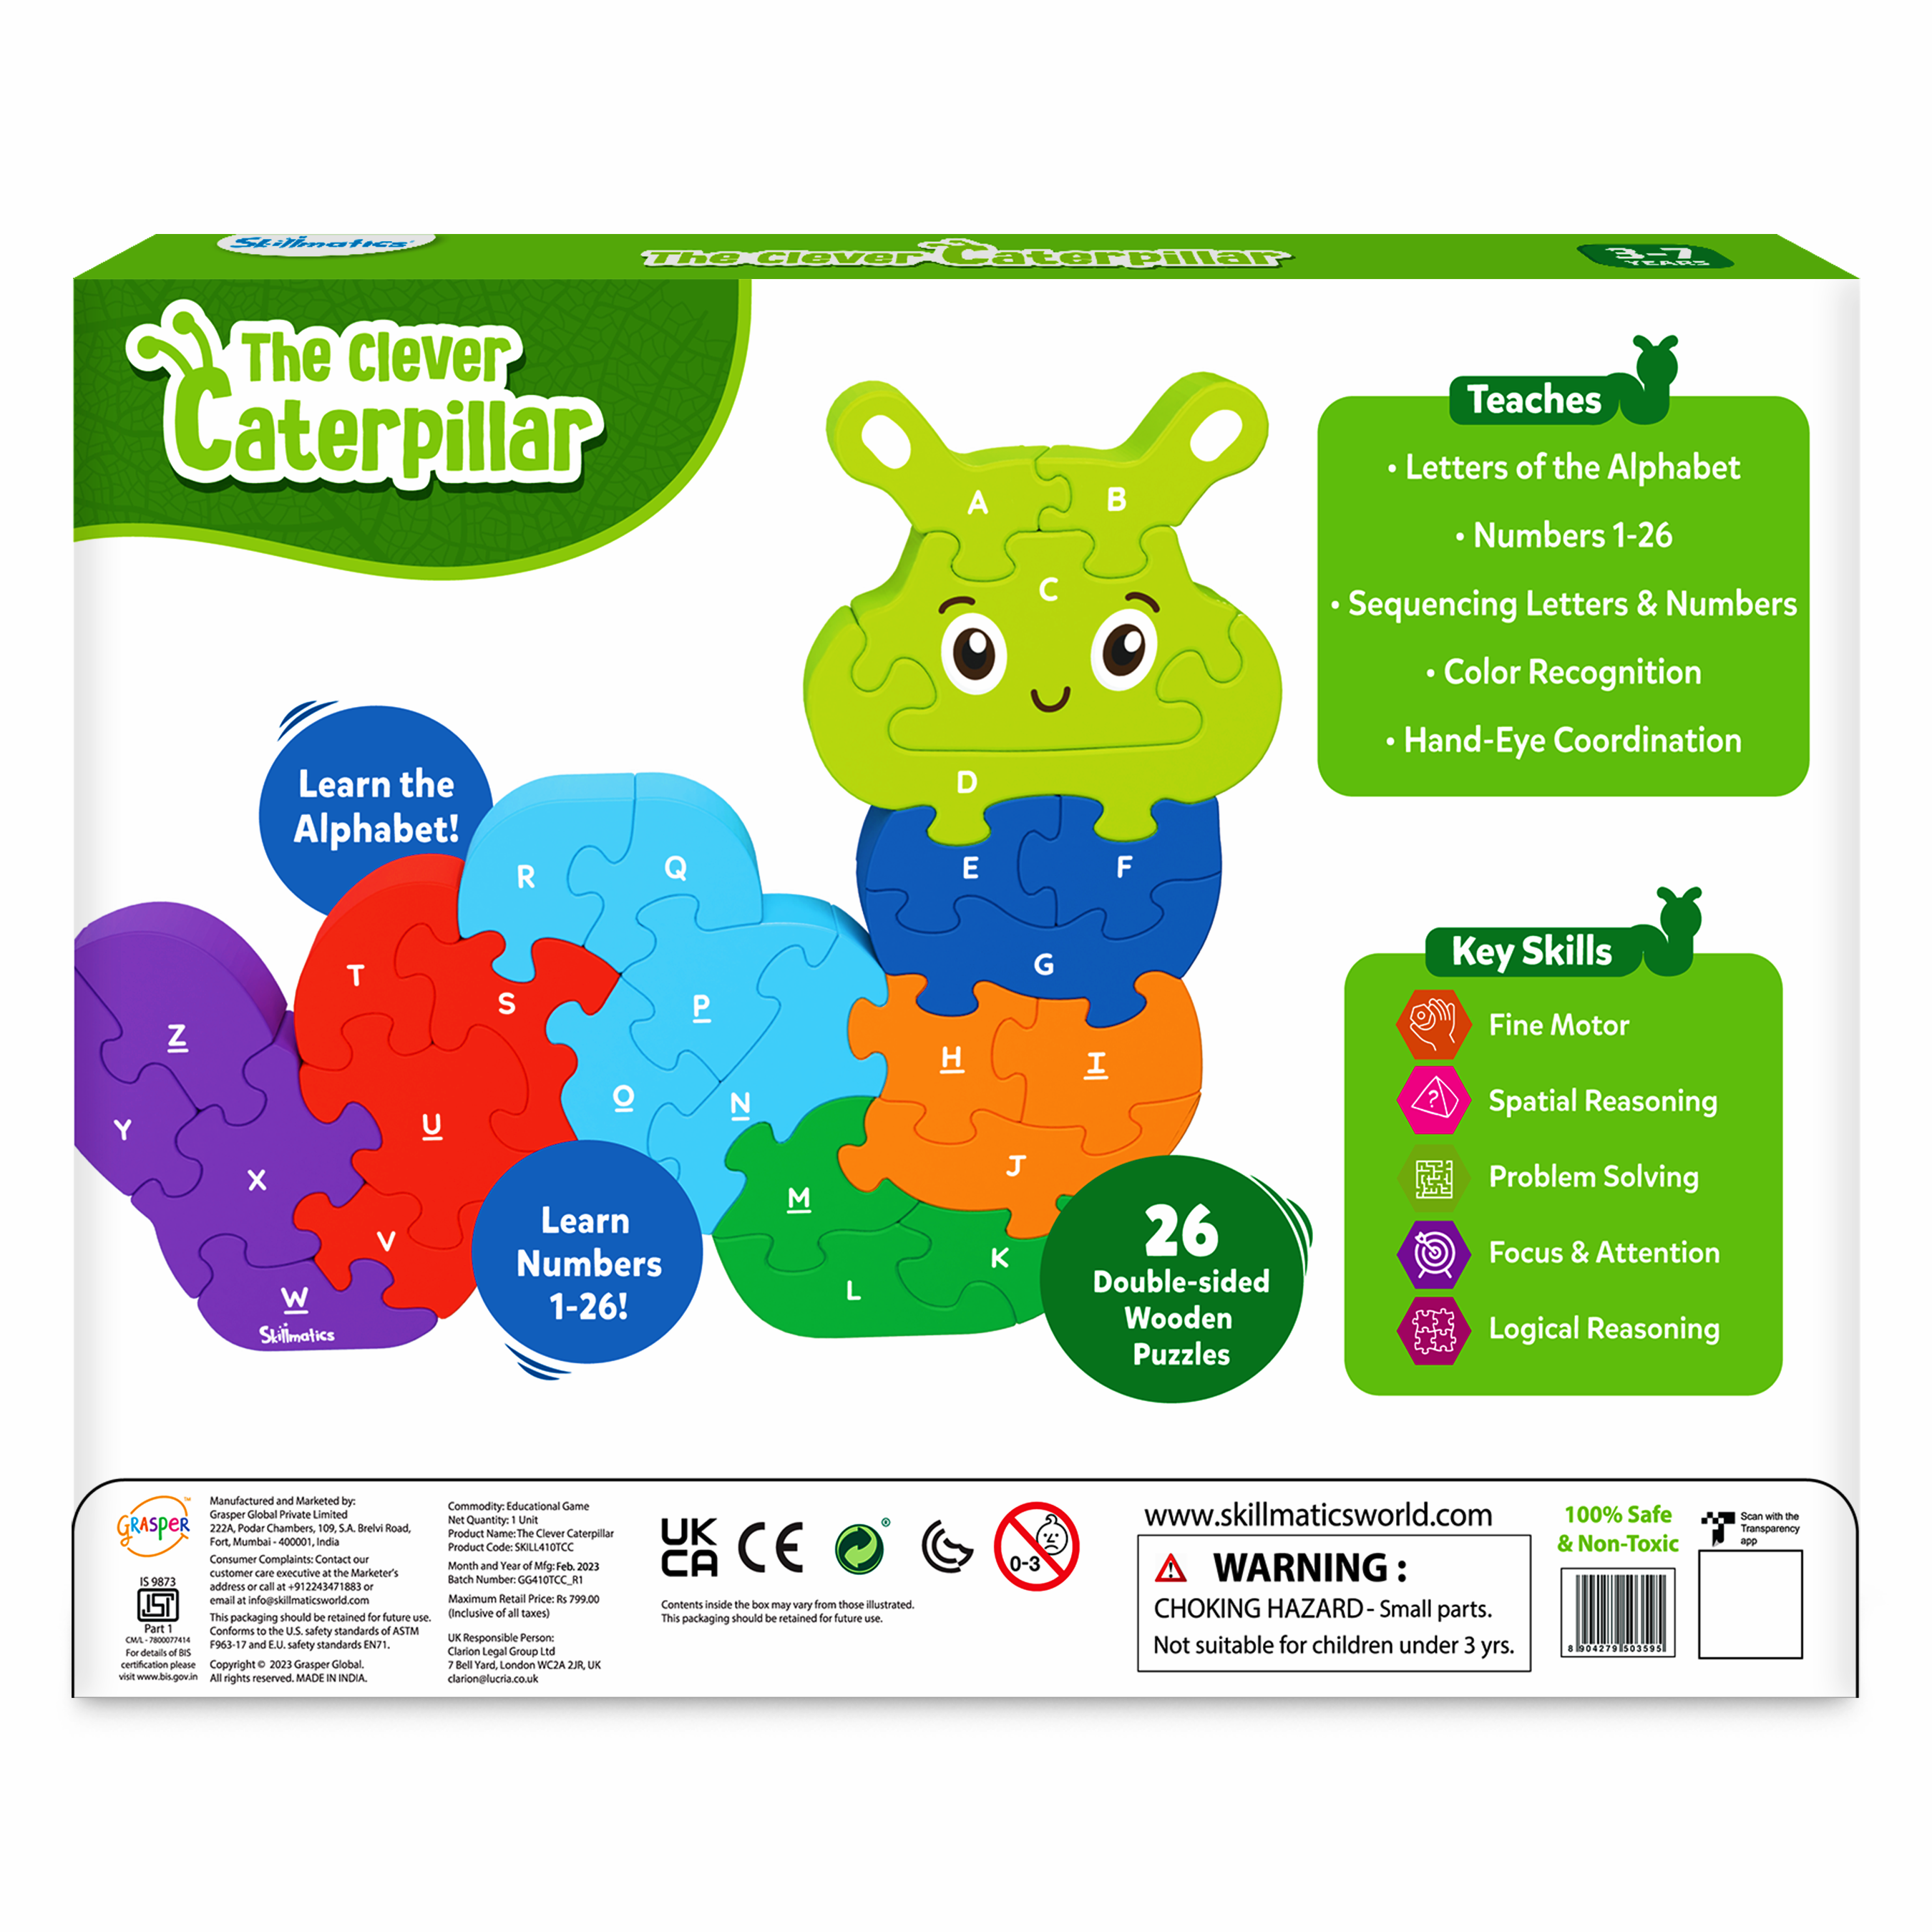 Skillmatics Wooden Puzzle - The Clever Caterpillar, 2 Puzzles in 1, 26 Double-Sided Pieces, Learn Letters & Numbers, Gifts for Ages 3 to 7